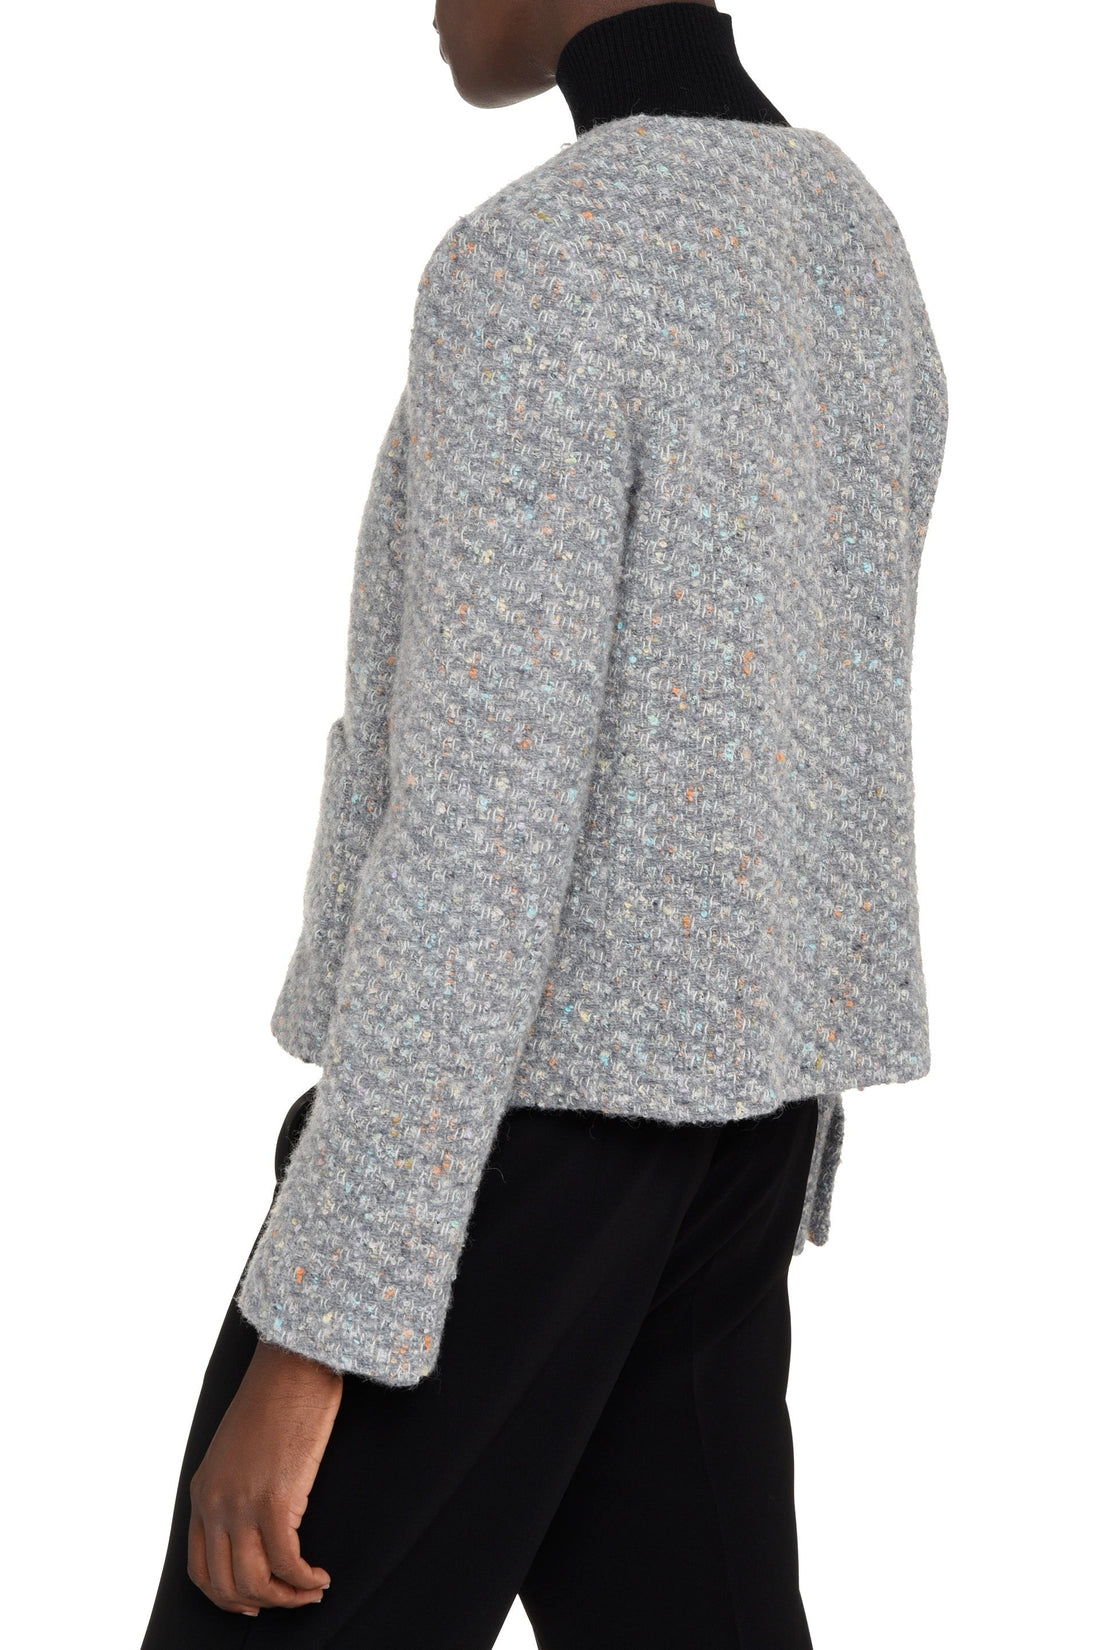 Moschino-OUTLET-SALE-Boucle wool jacket-ARCHIVIST